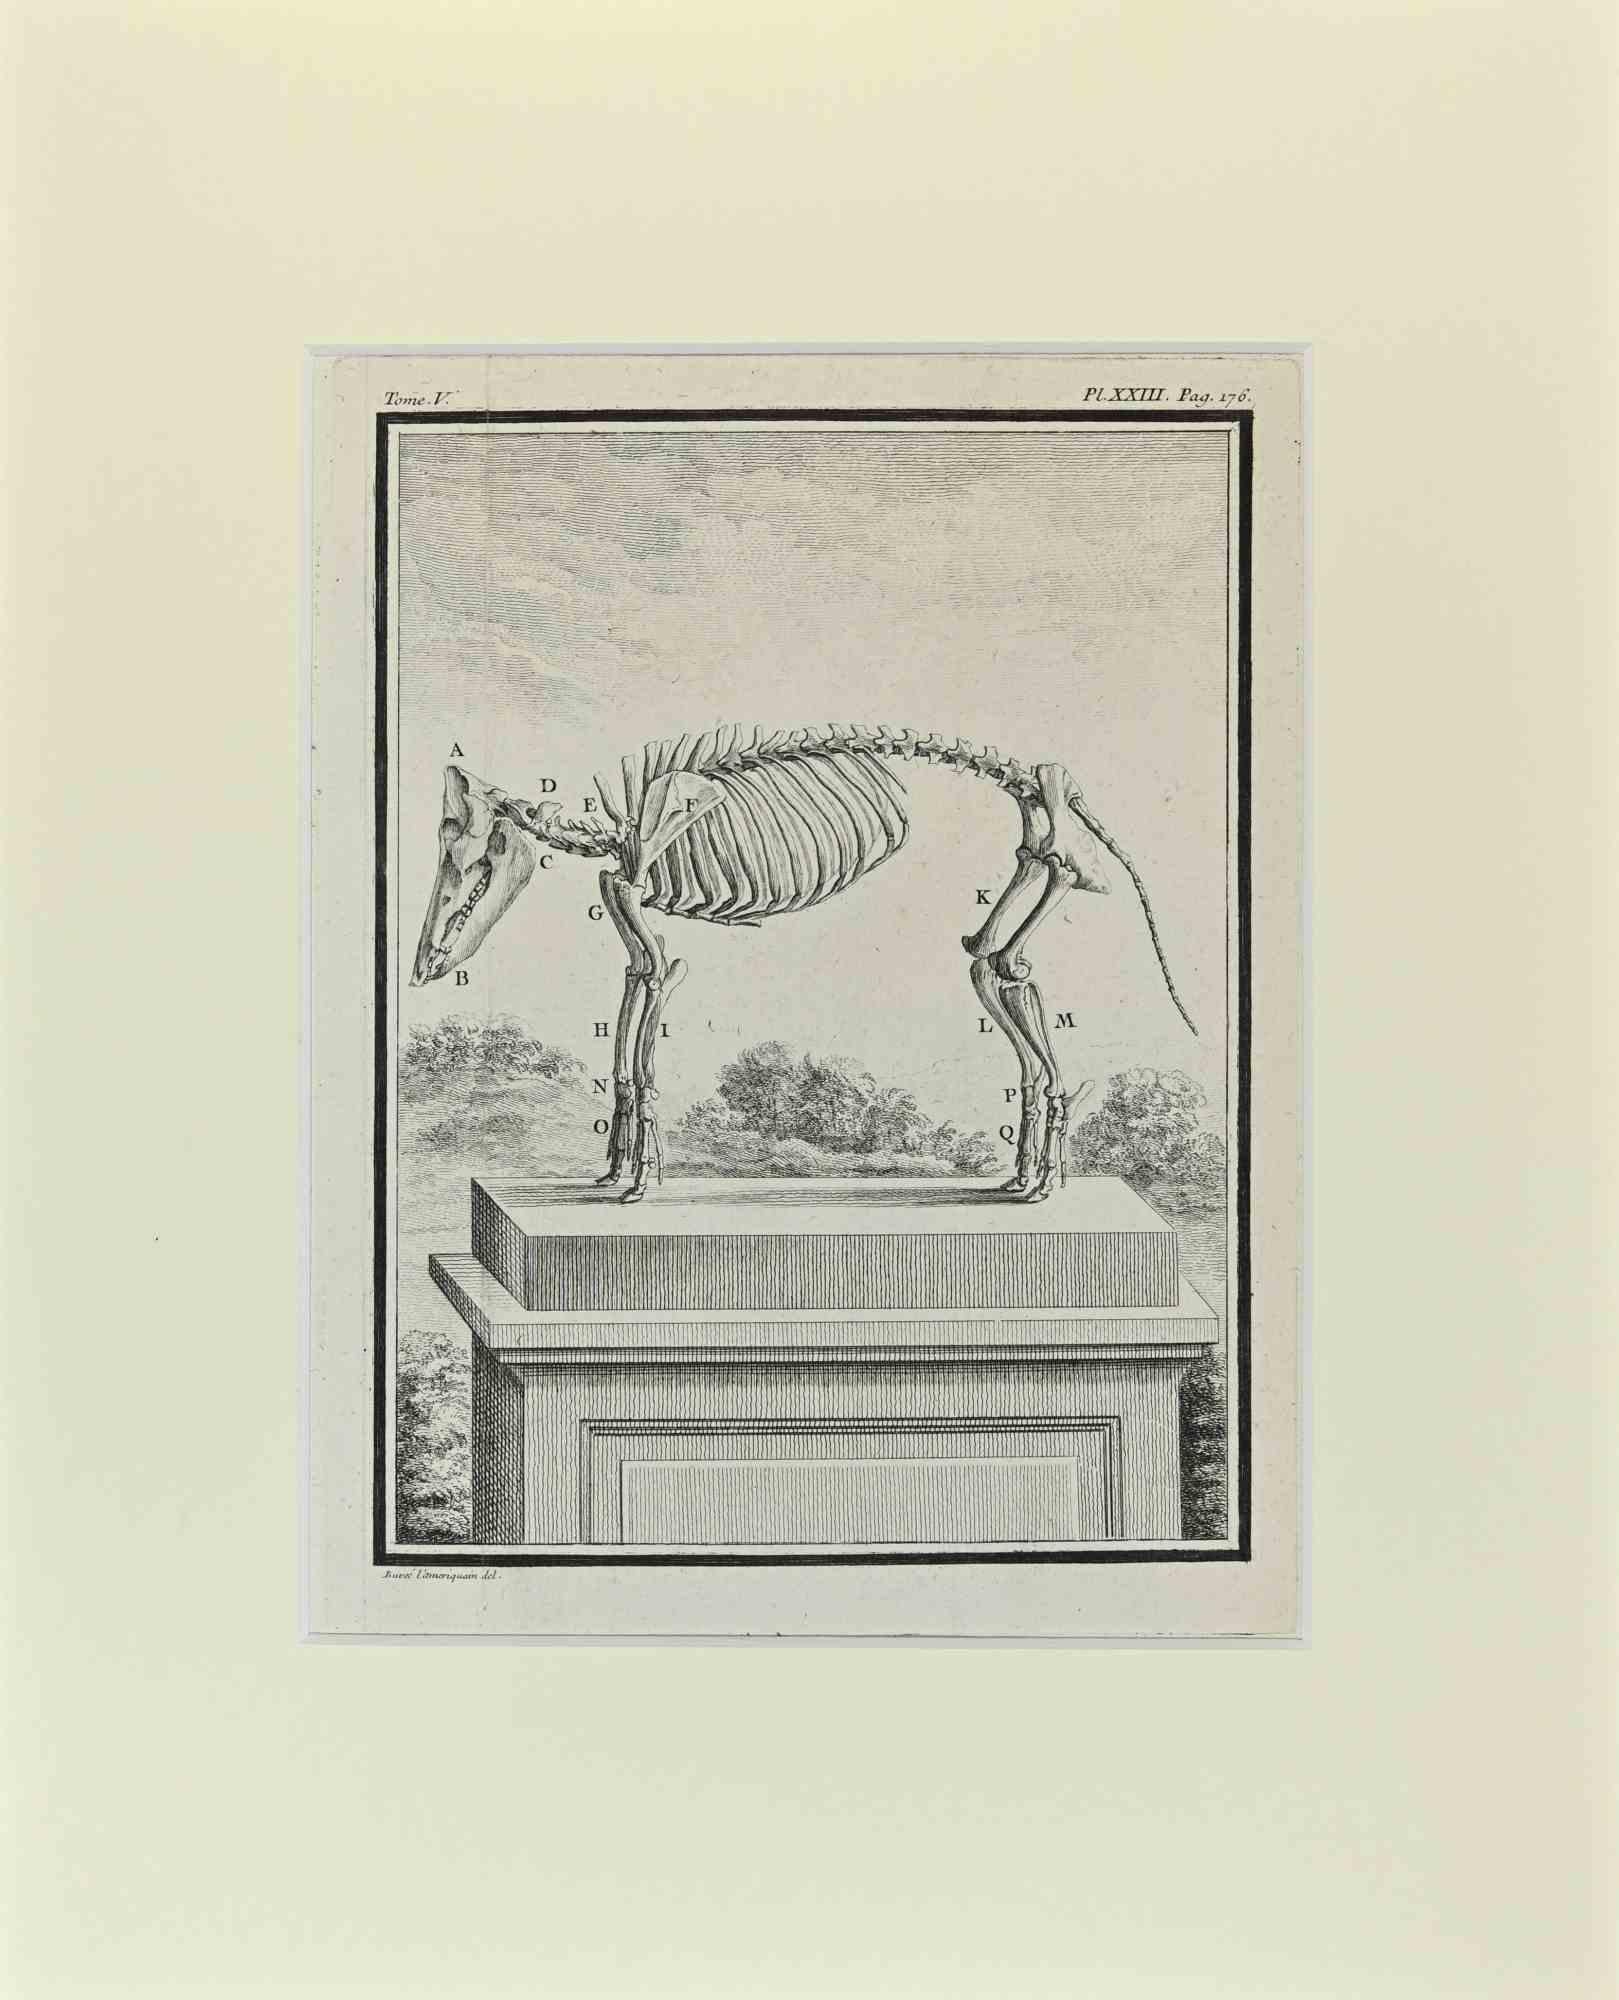 Animal Skeleton is an artwork realized  by  Buvée l'Américain in 1771.  

Etching B./W. print  on ivory paper. Signed on  plate on the lower left margin.

The work is glued on cardboard. Total dimensions: 35x28 cm.

The artwork belongs to the suite